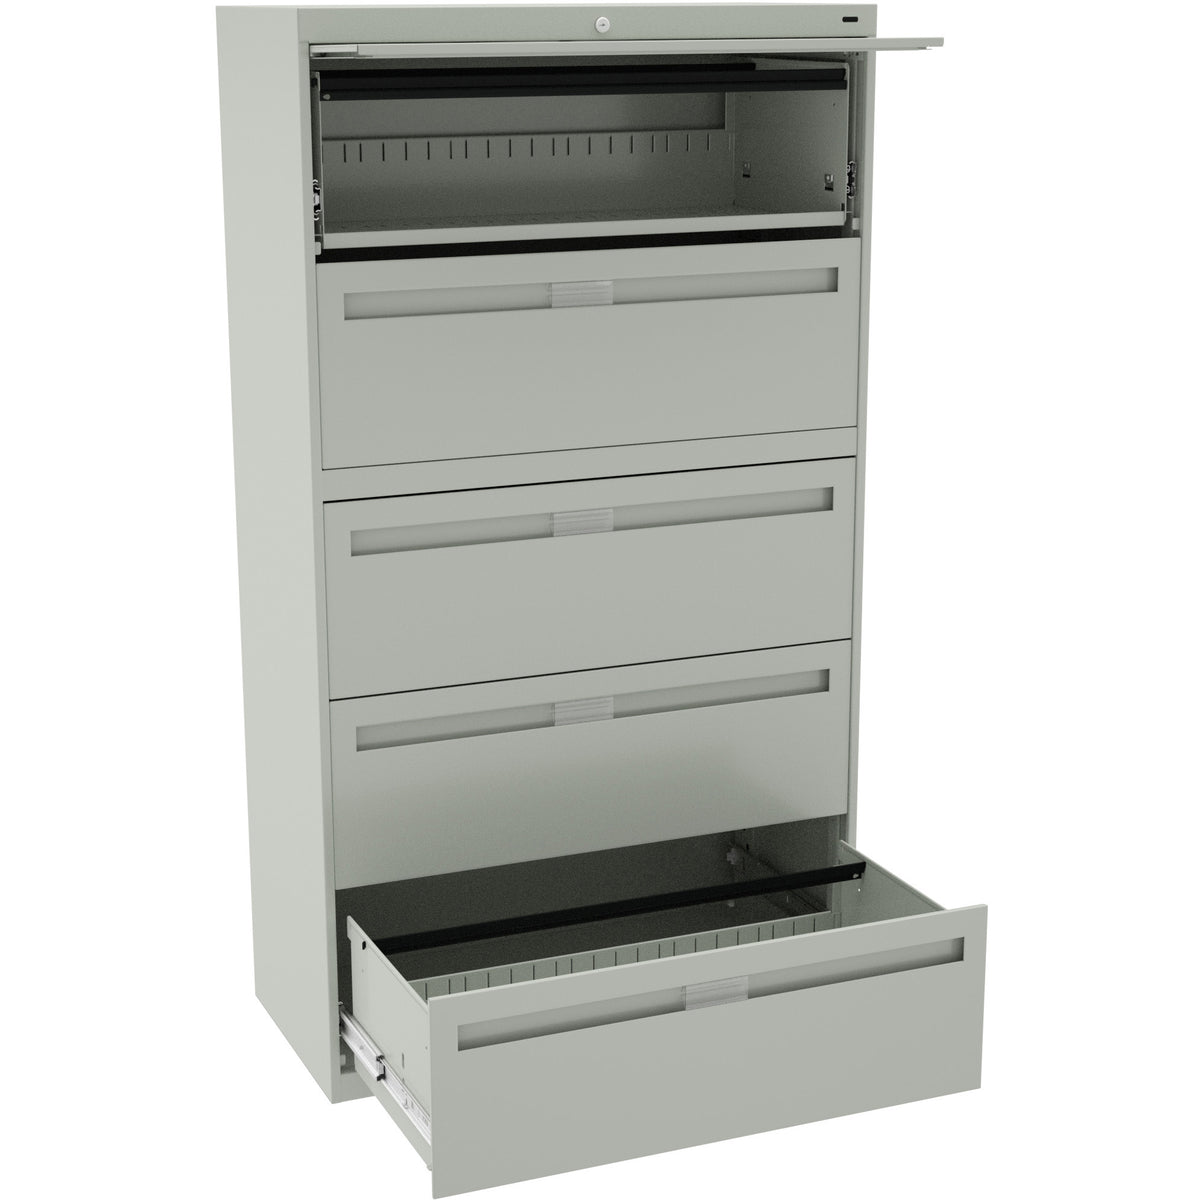 Tennsco 36" Wide Five-Drawer Lateral File with Fixed Drawer Fronts, LPL3660L50